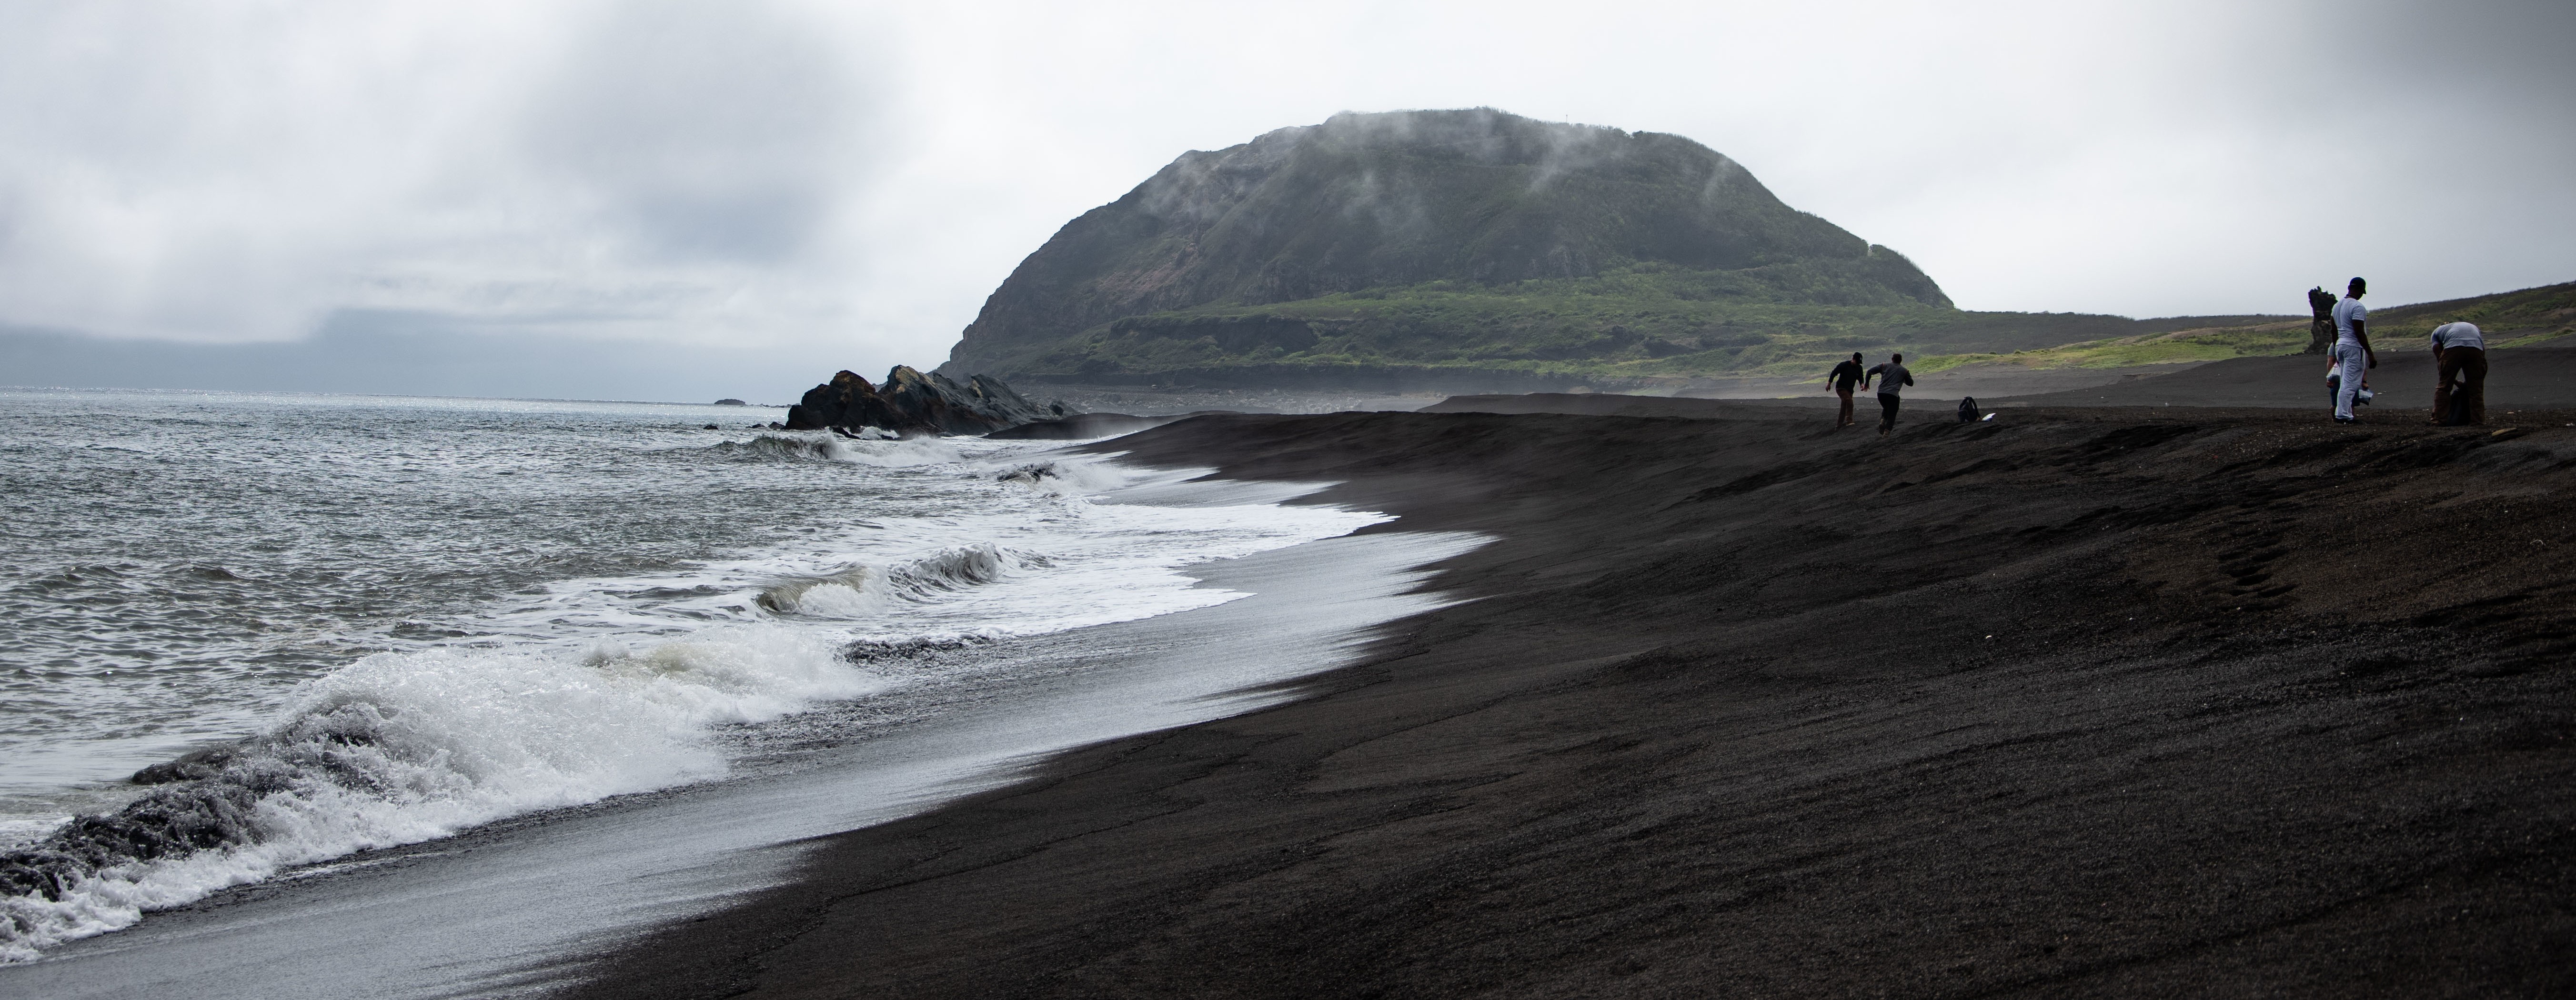 Waves on the black sands of Iwo Jima with an island in the distance.